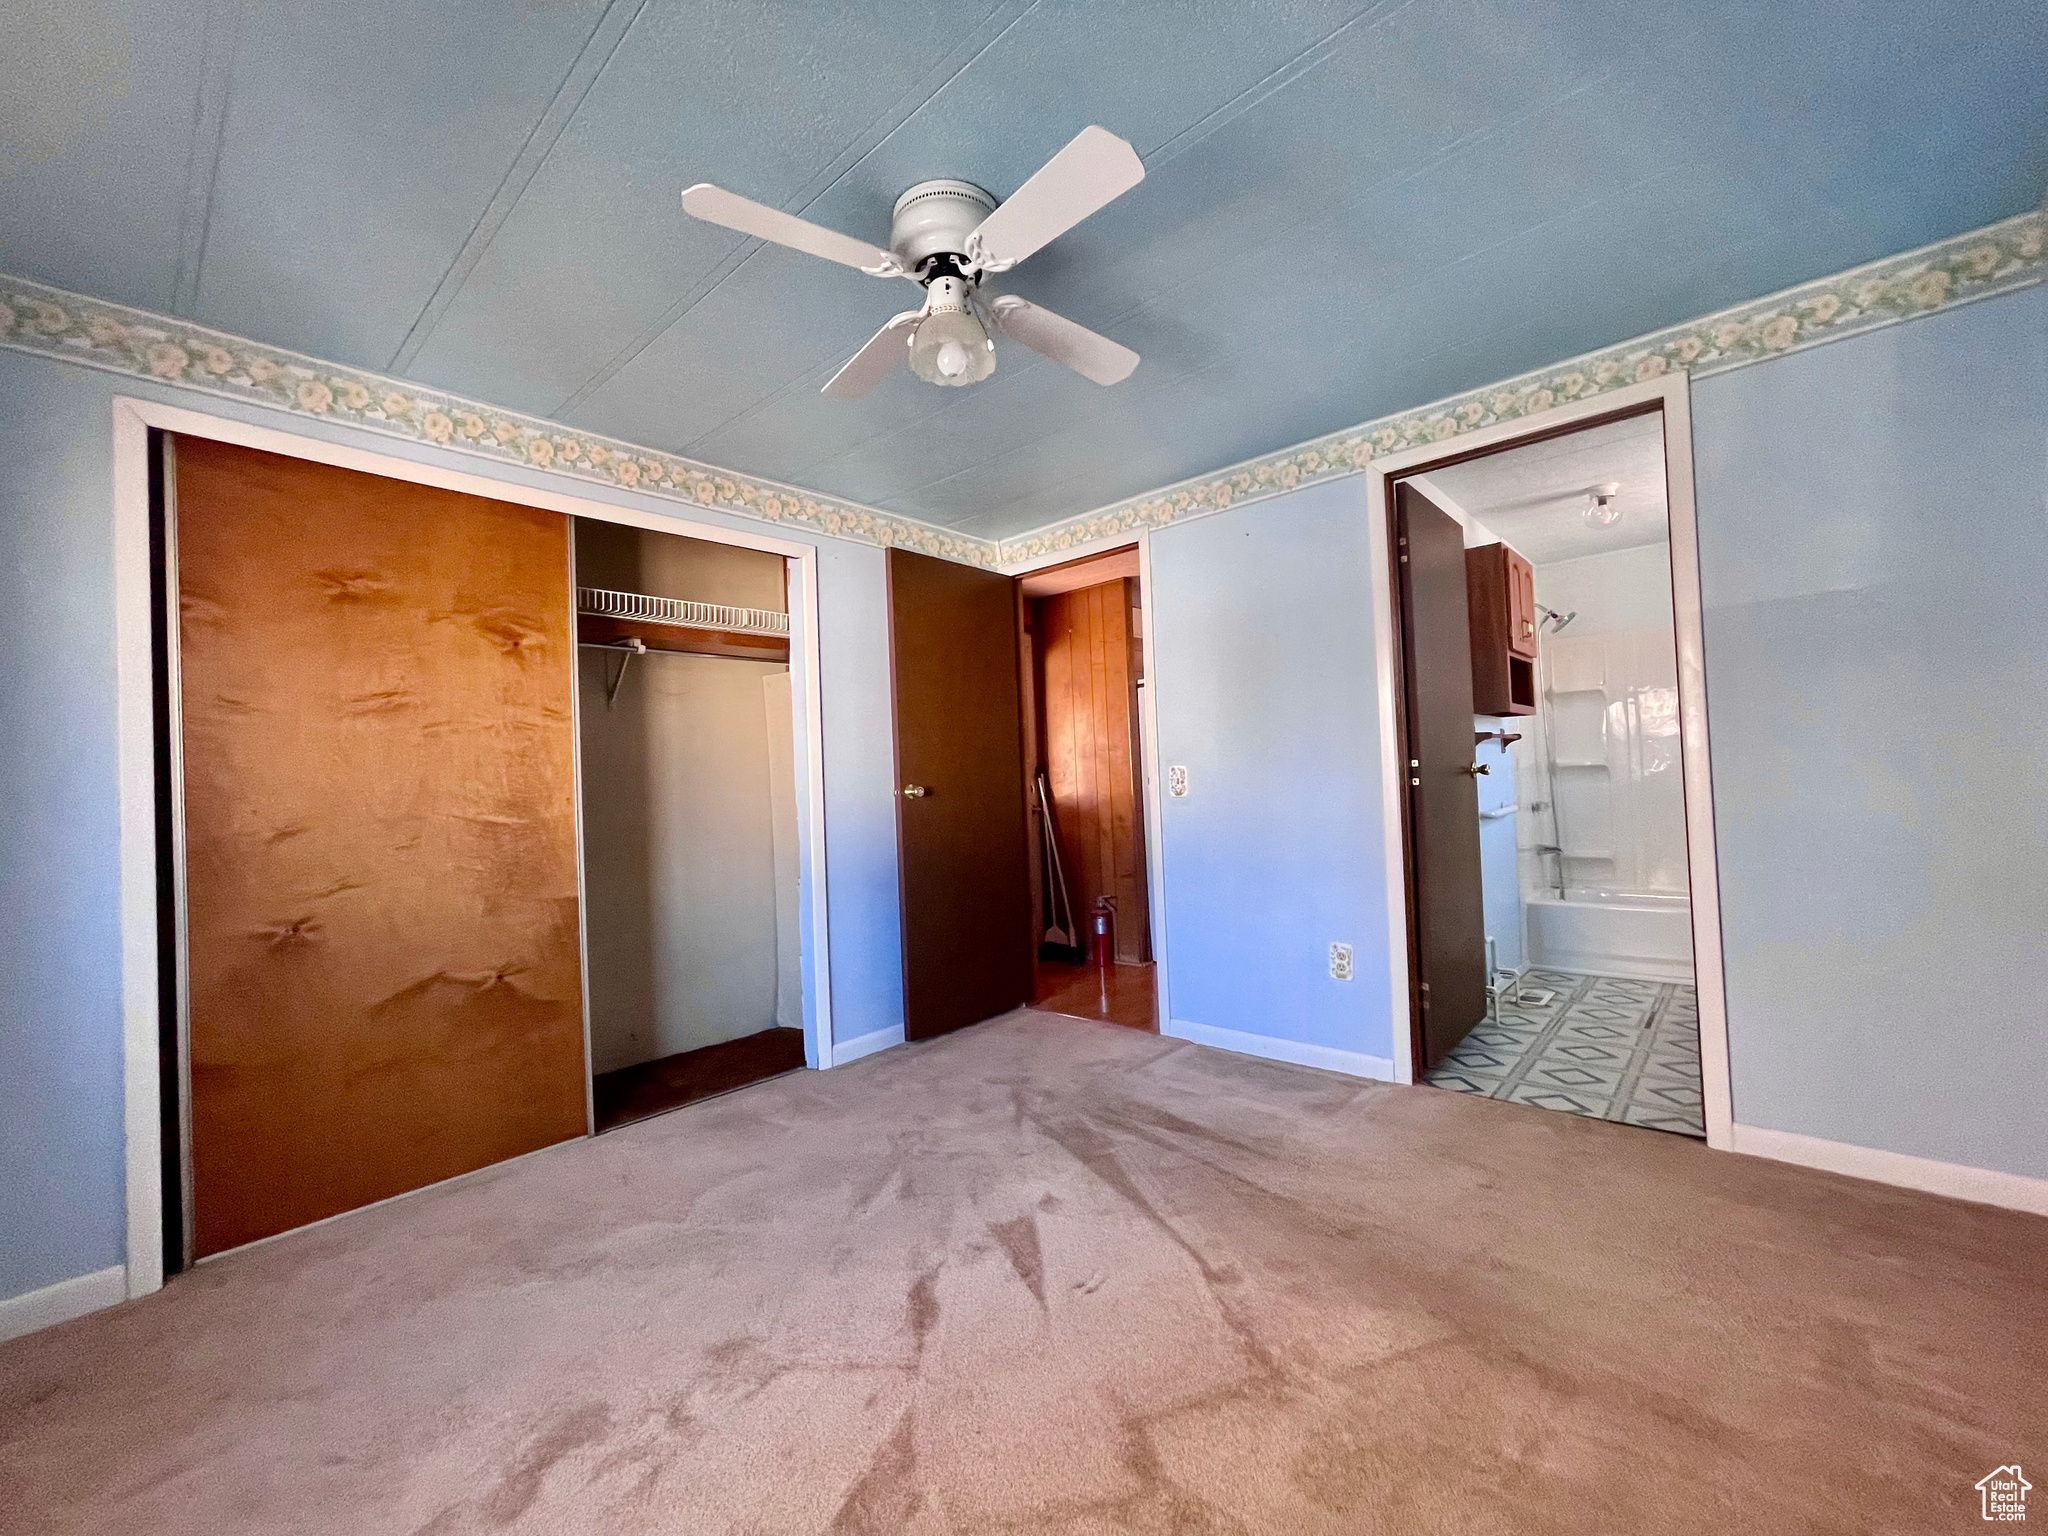 Unfurnished bedroom with light colored carpet, connected bathroom, ceiling fan, and a closet